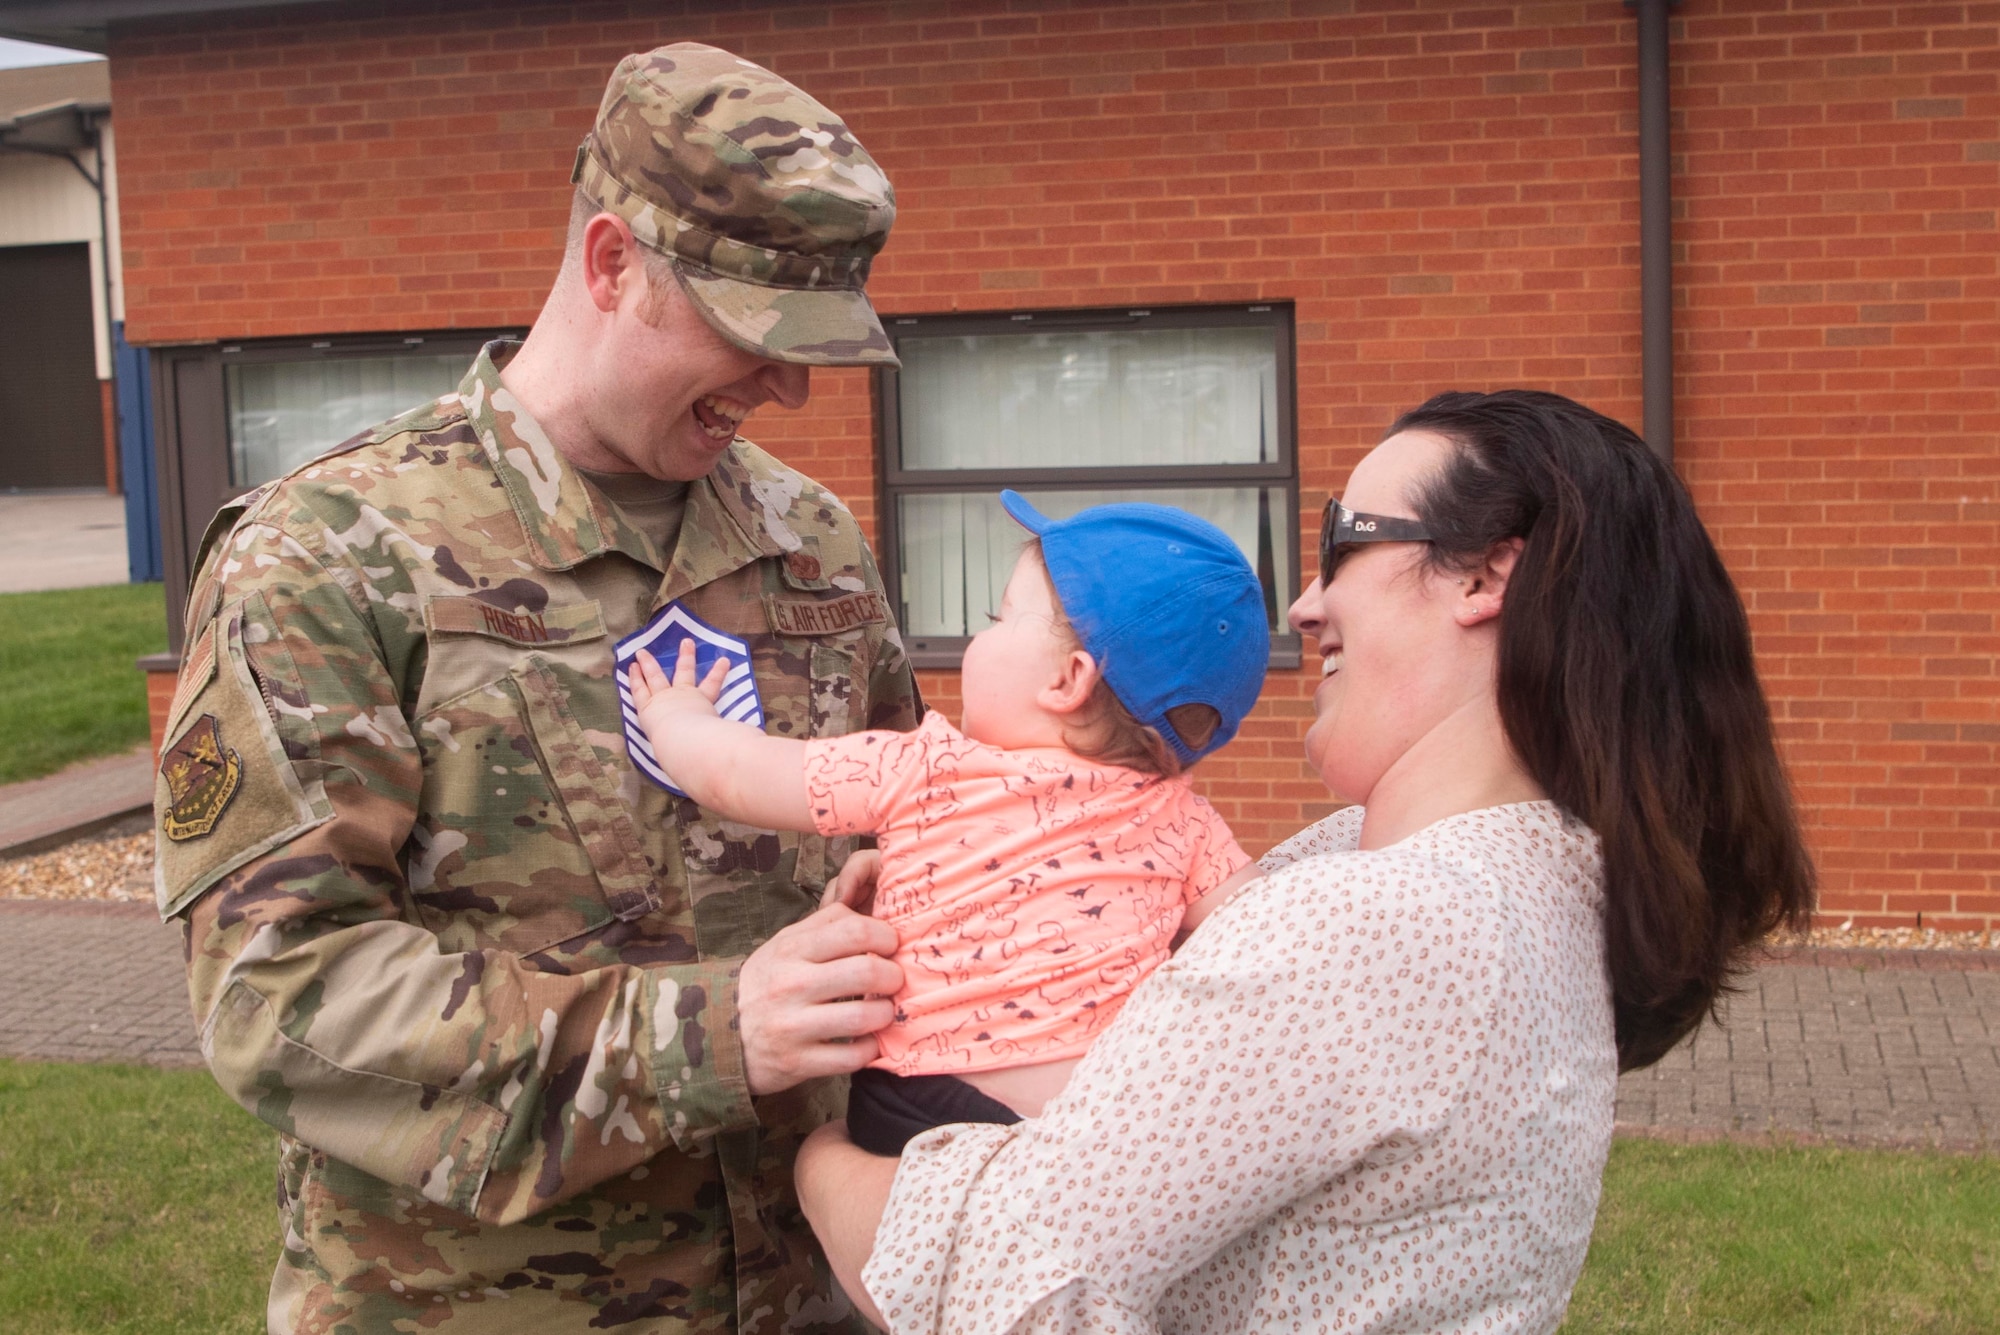 A newly selected master sergeant celebrates with his family July 24, 2020, at RAF Mildenhall, England. Promotion to master sergeant marks the entry into the final tier of the enlisted force structure. (U.S. Air Force photo by Airman 1st Class Joseph Barron)